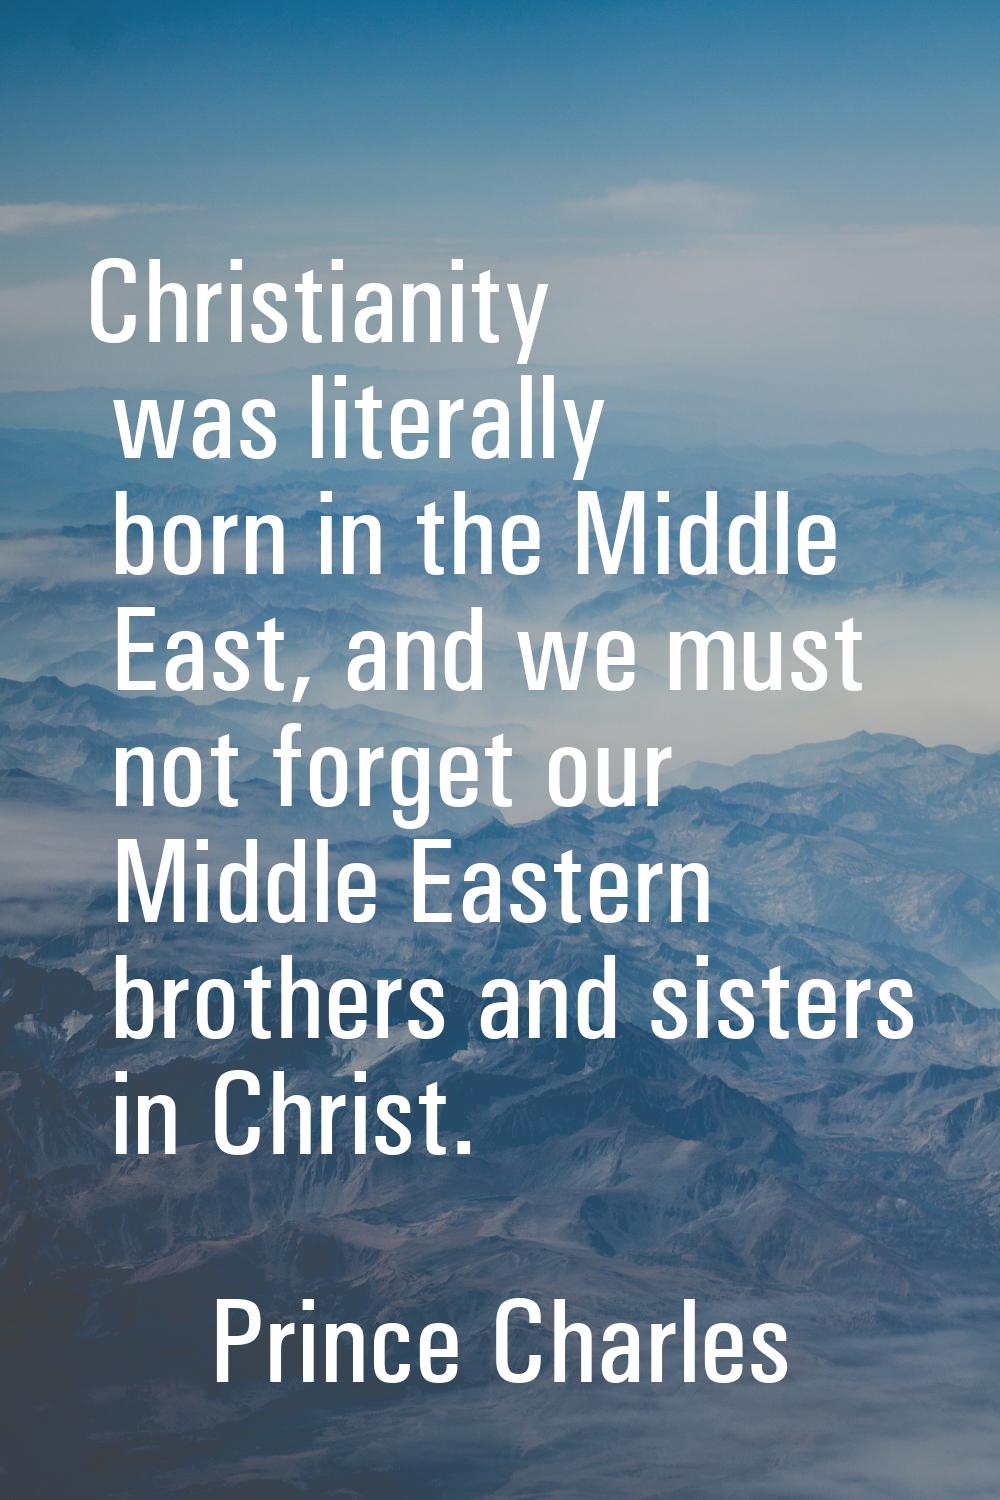 Christianity was literally born in the Middle East, and we must not forget our Middle Eastern broth